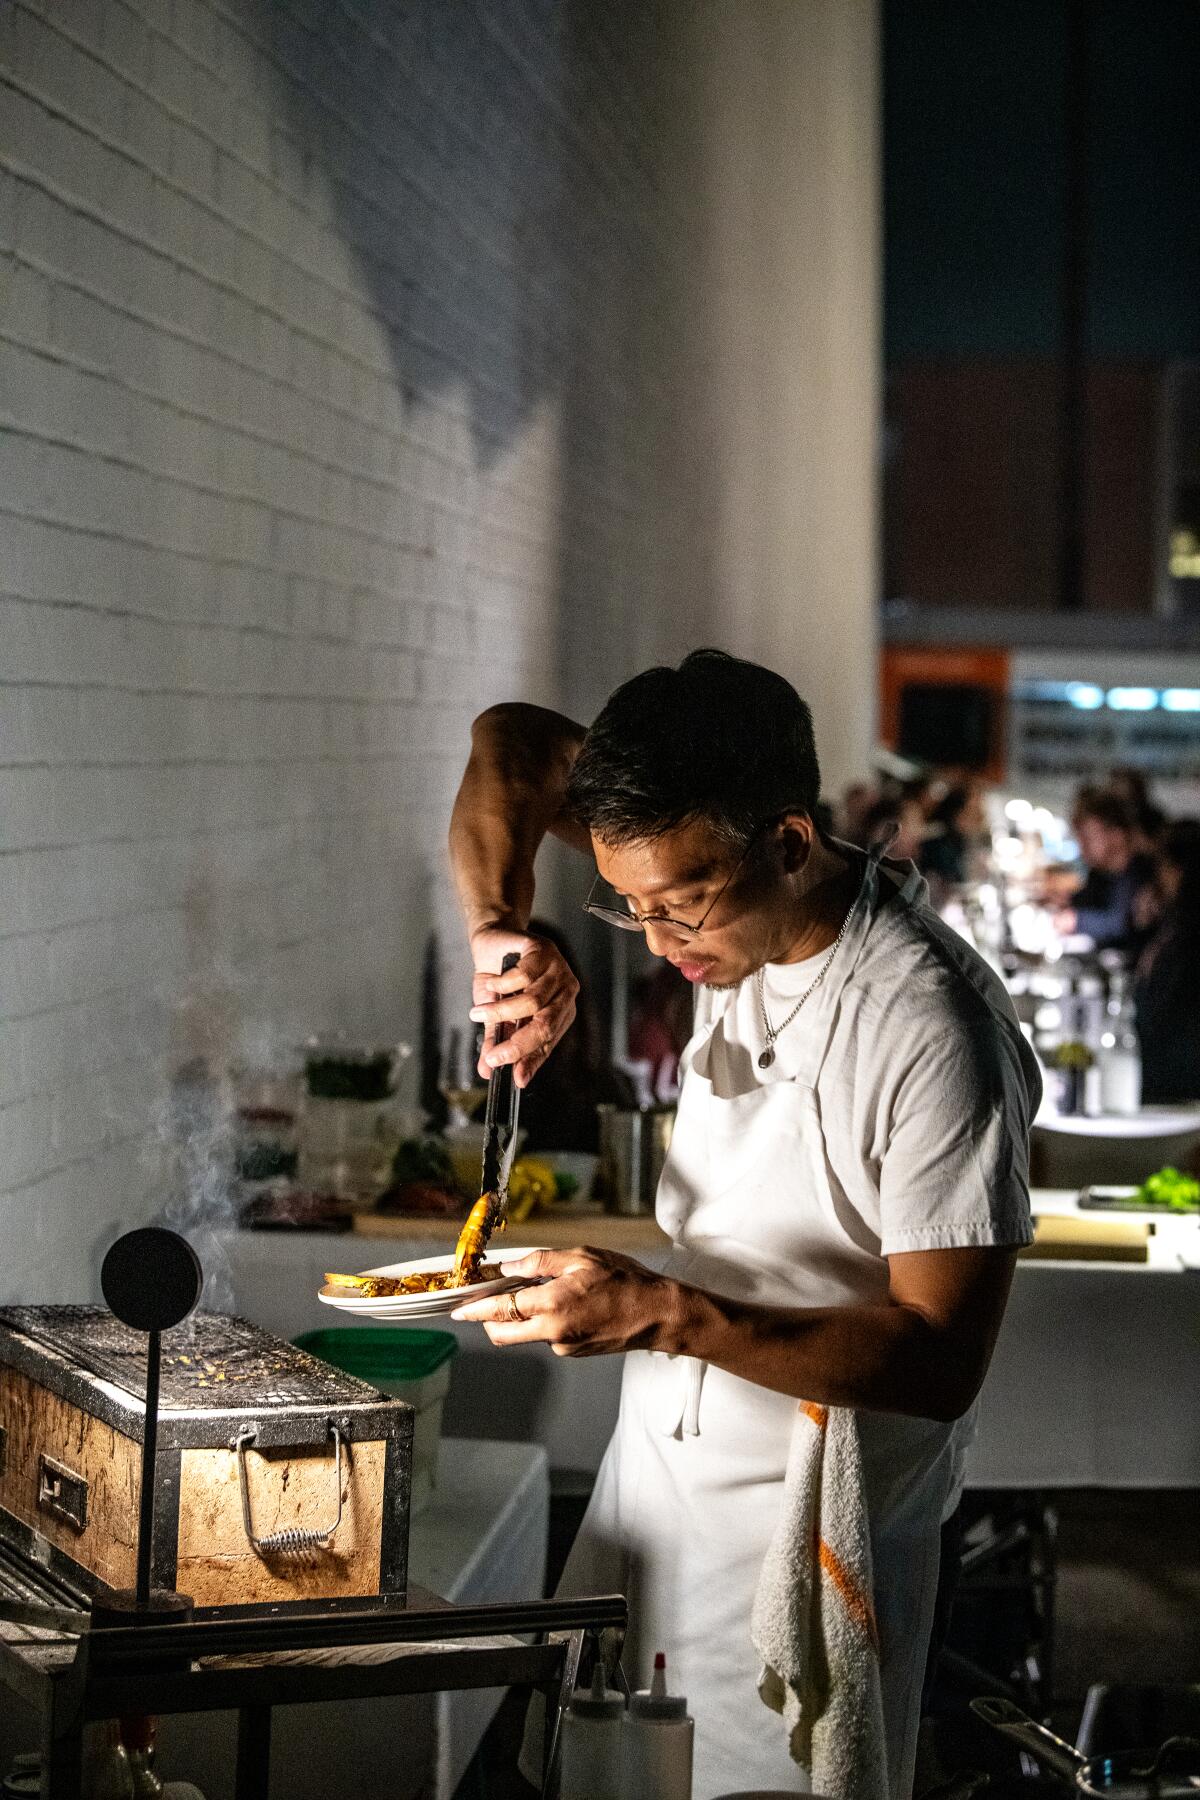 A chef cooks outside in an alley at night 